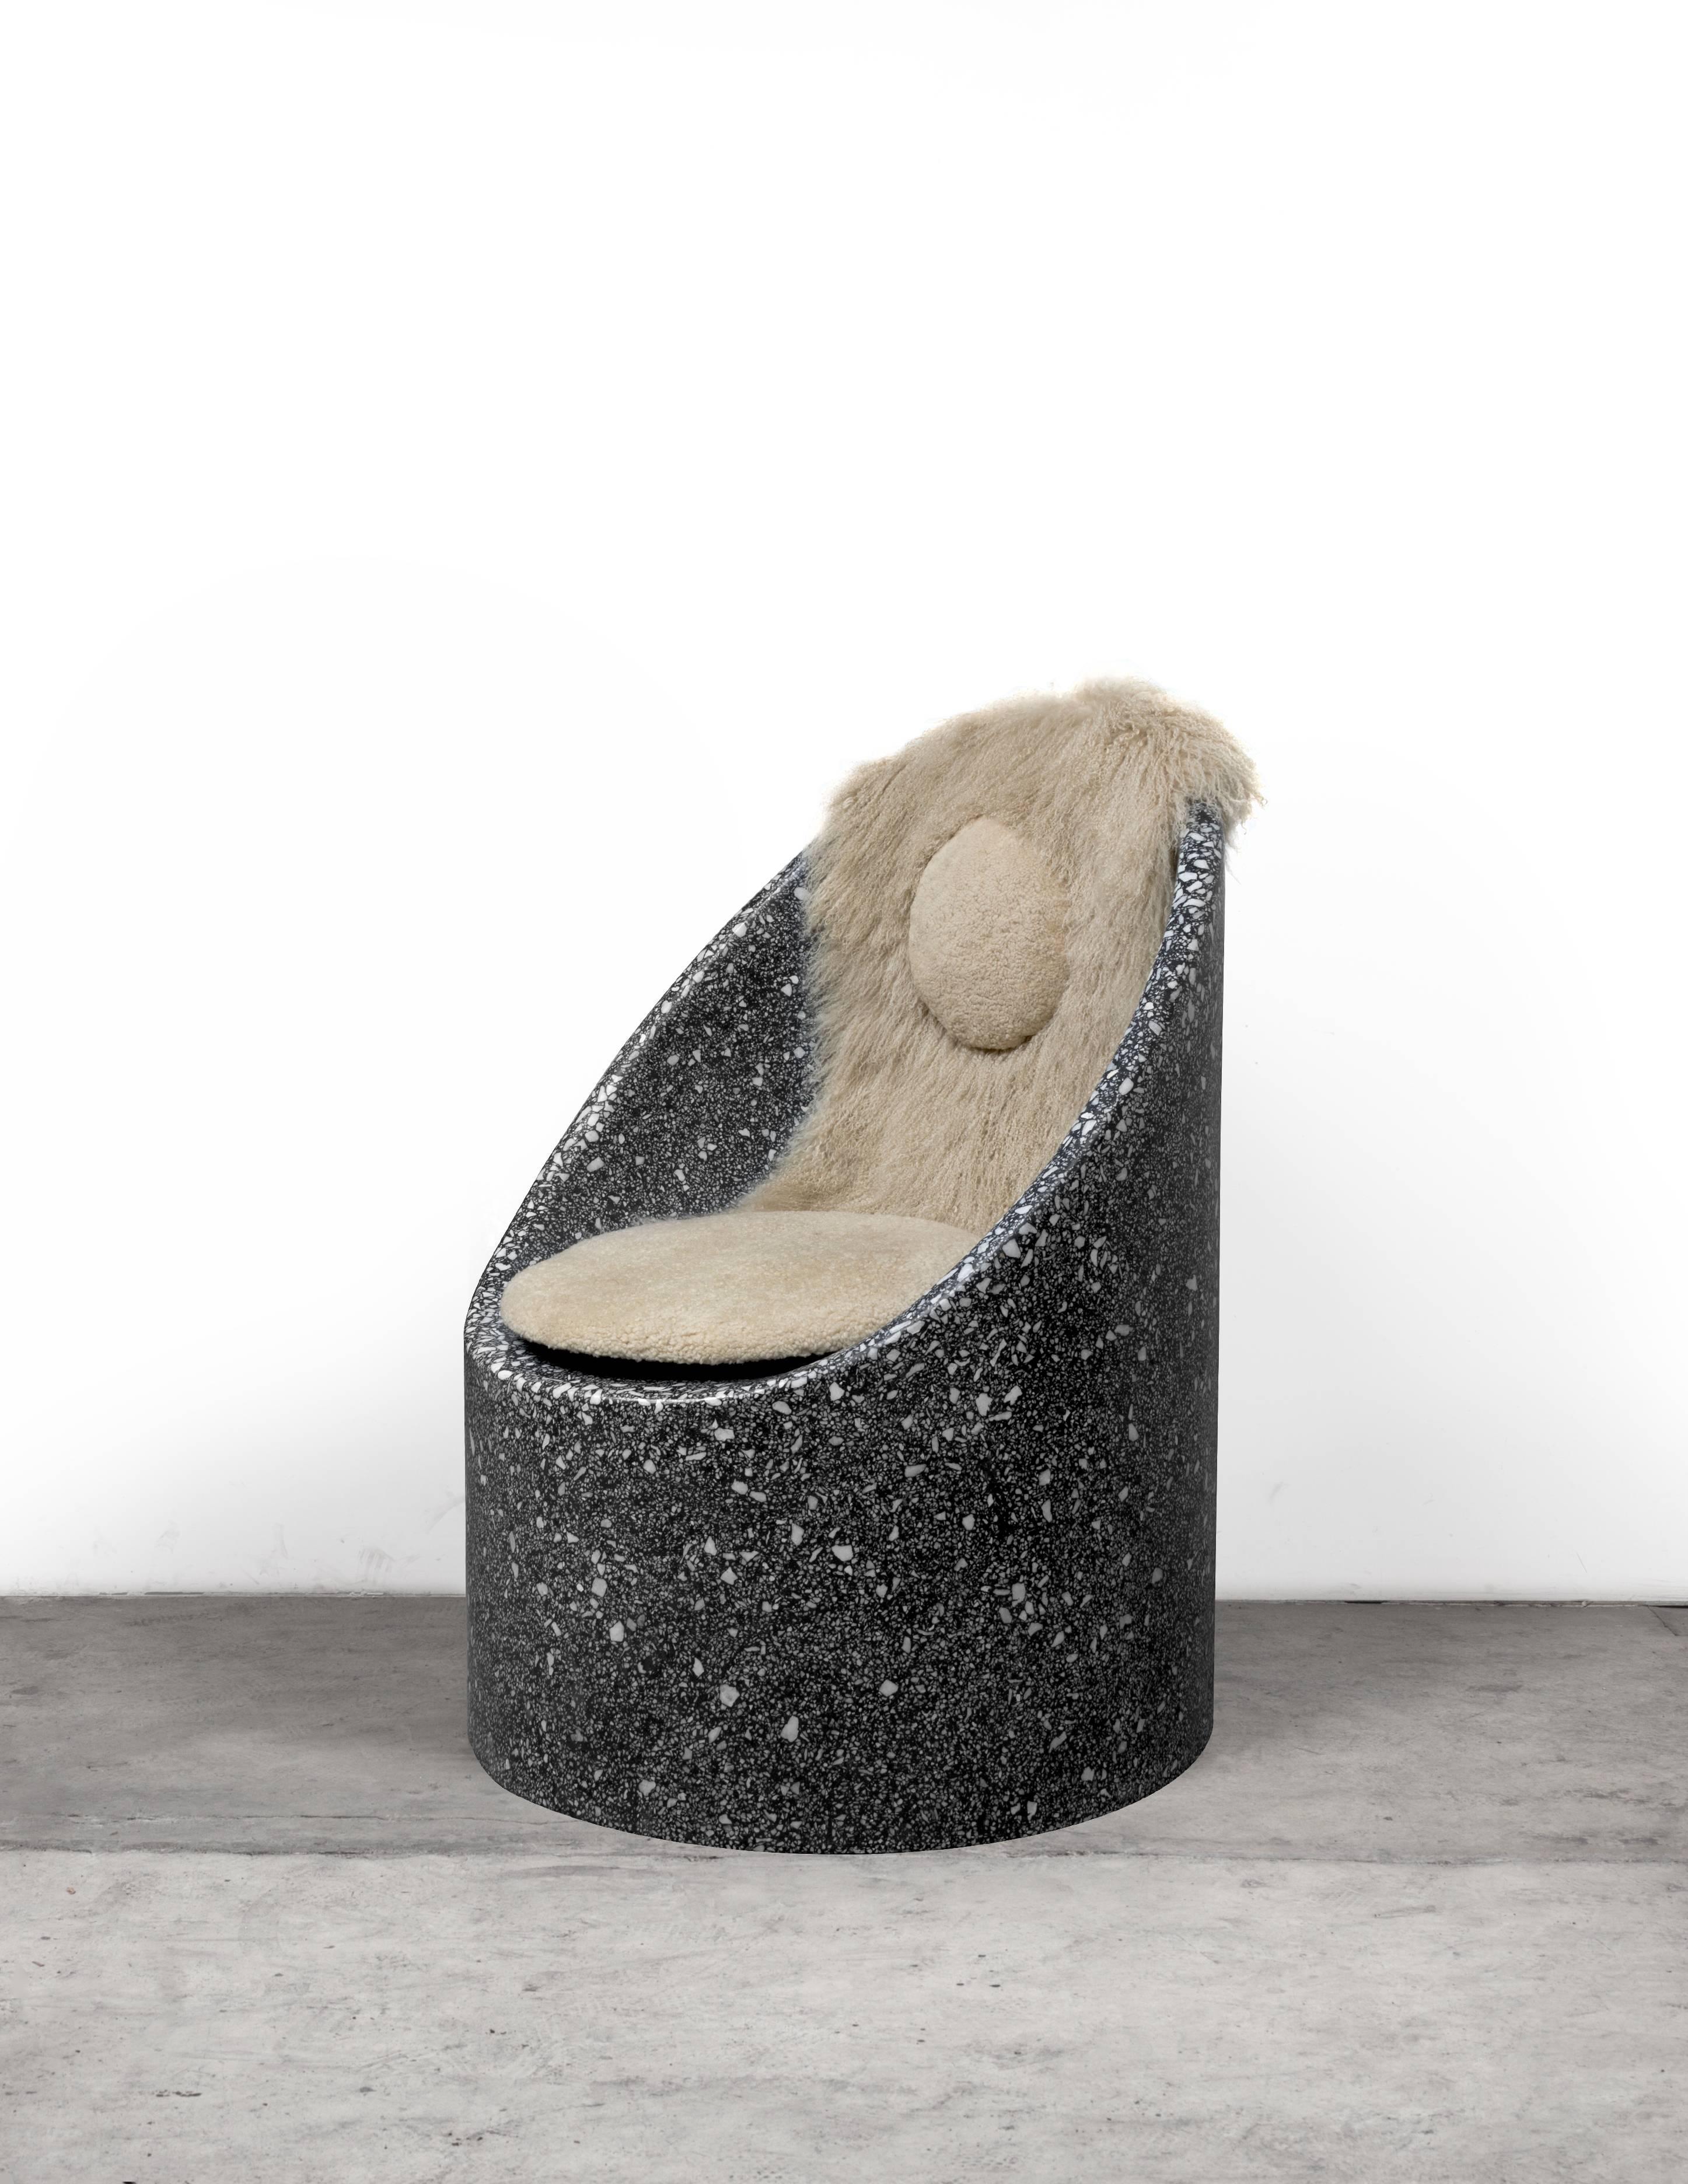 American Sculptural Cozy Cave Chair in Black Cement/White Marble Terrazzo with Sheepskin For Sale